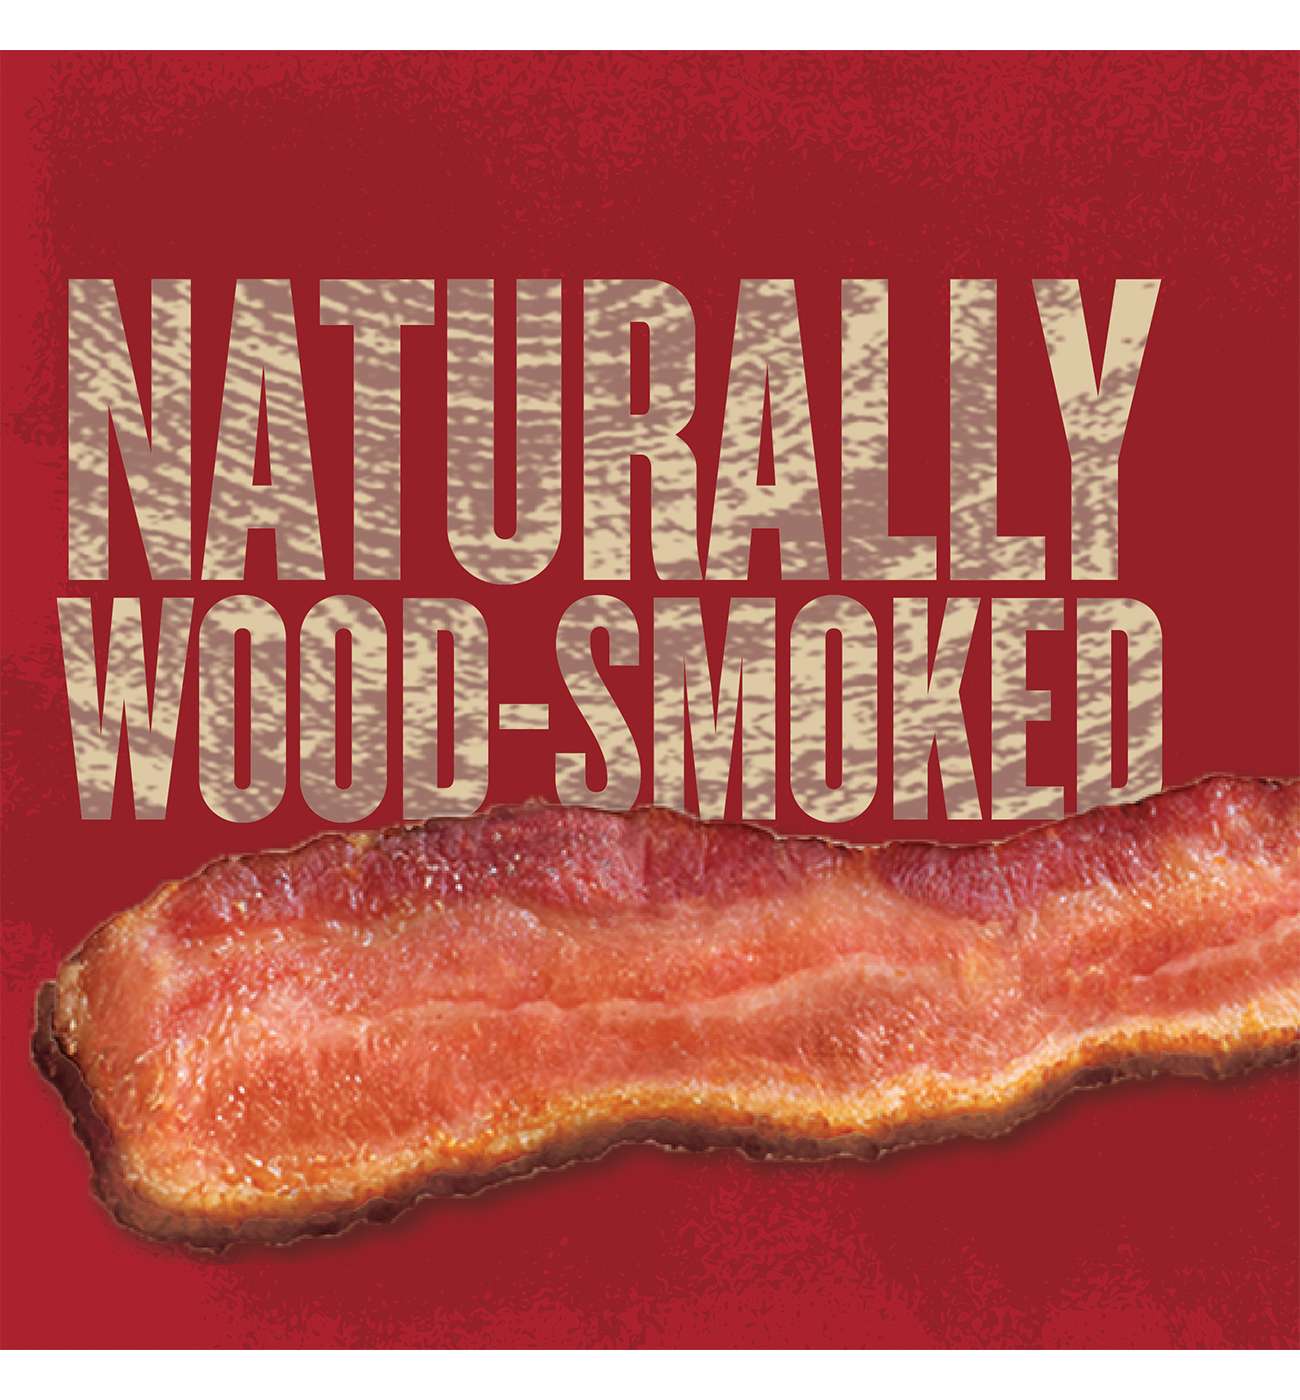 Wright Brand Applewood Smoked Thick Cut Bacon; image 6 of 6